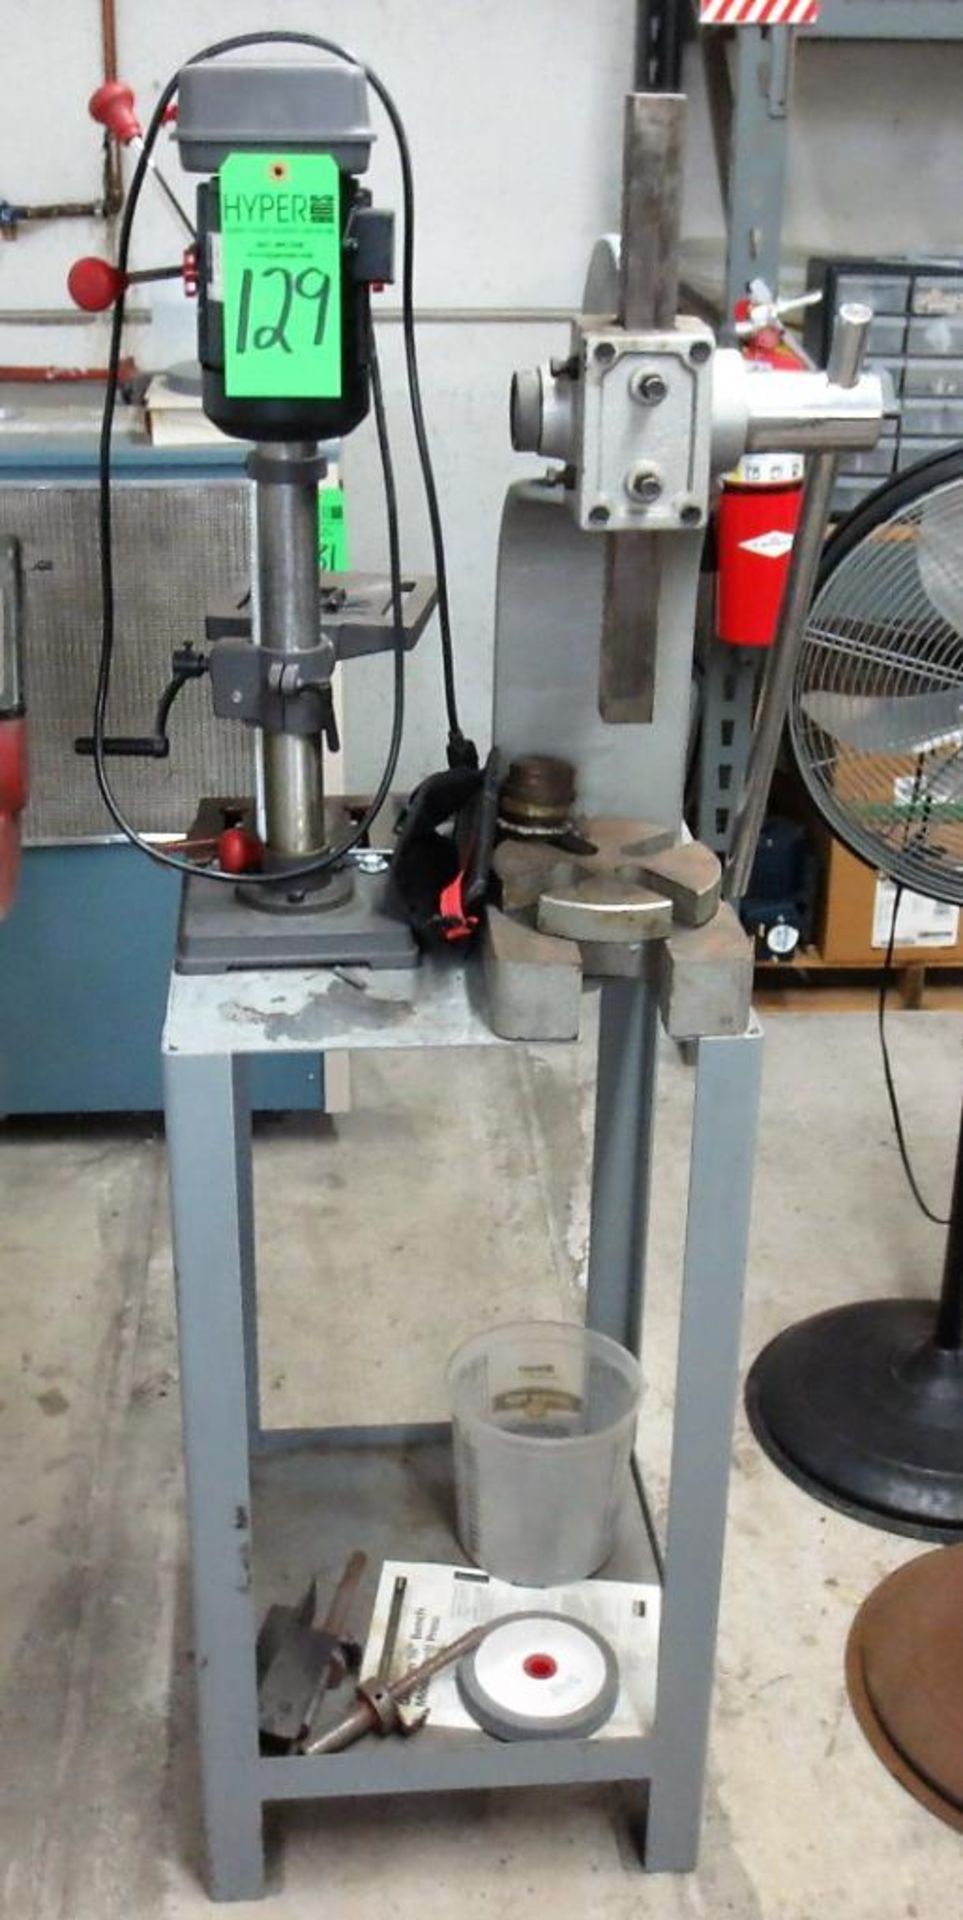 Stand With Arbor Press and Dayton 10" Drill Press Model 16N196, 120V, 1 PH ( Loc. On Mezzanine buyer